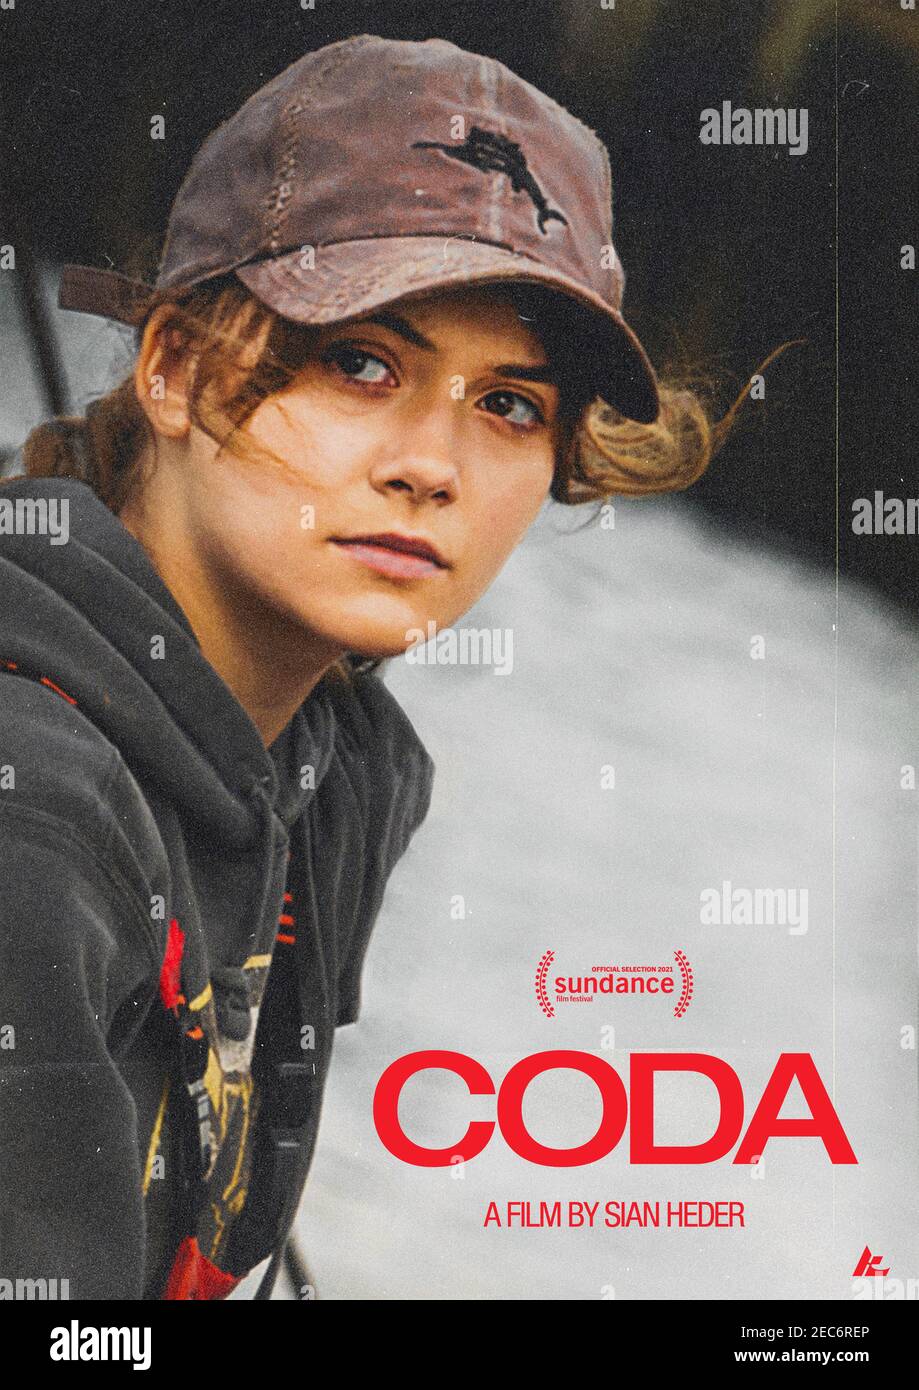 CODA (2021) directed by Sian Heder and starring Emilia Jones, Marlee Matlin and Troy Kotsur. Ruby is CODA (Child of Deaf Adults) and is torn between supporting her parents or pursuing her love of music. Stock Photo